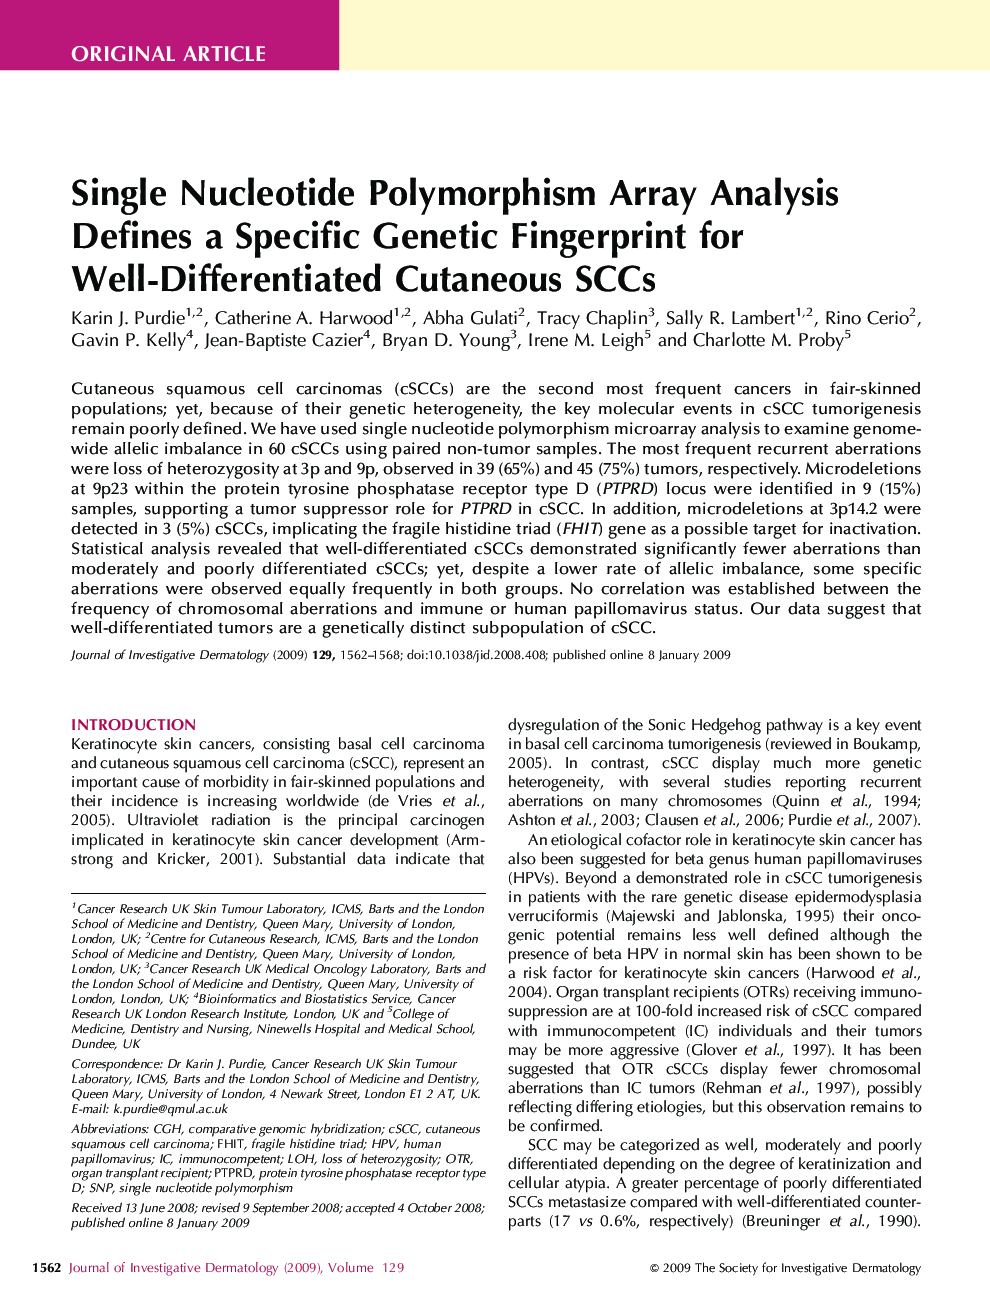 Single Nucleotide Polymorphism Array Analysis Defines a Specific Genetic Fingerprint for Well-Differentiated Cutaneous SCCs